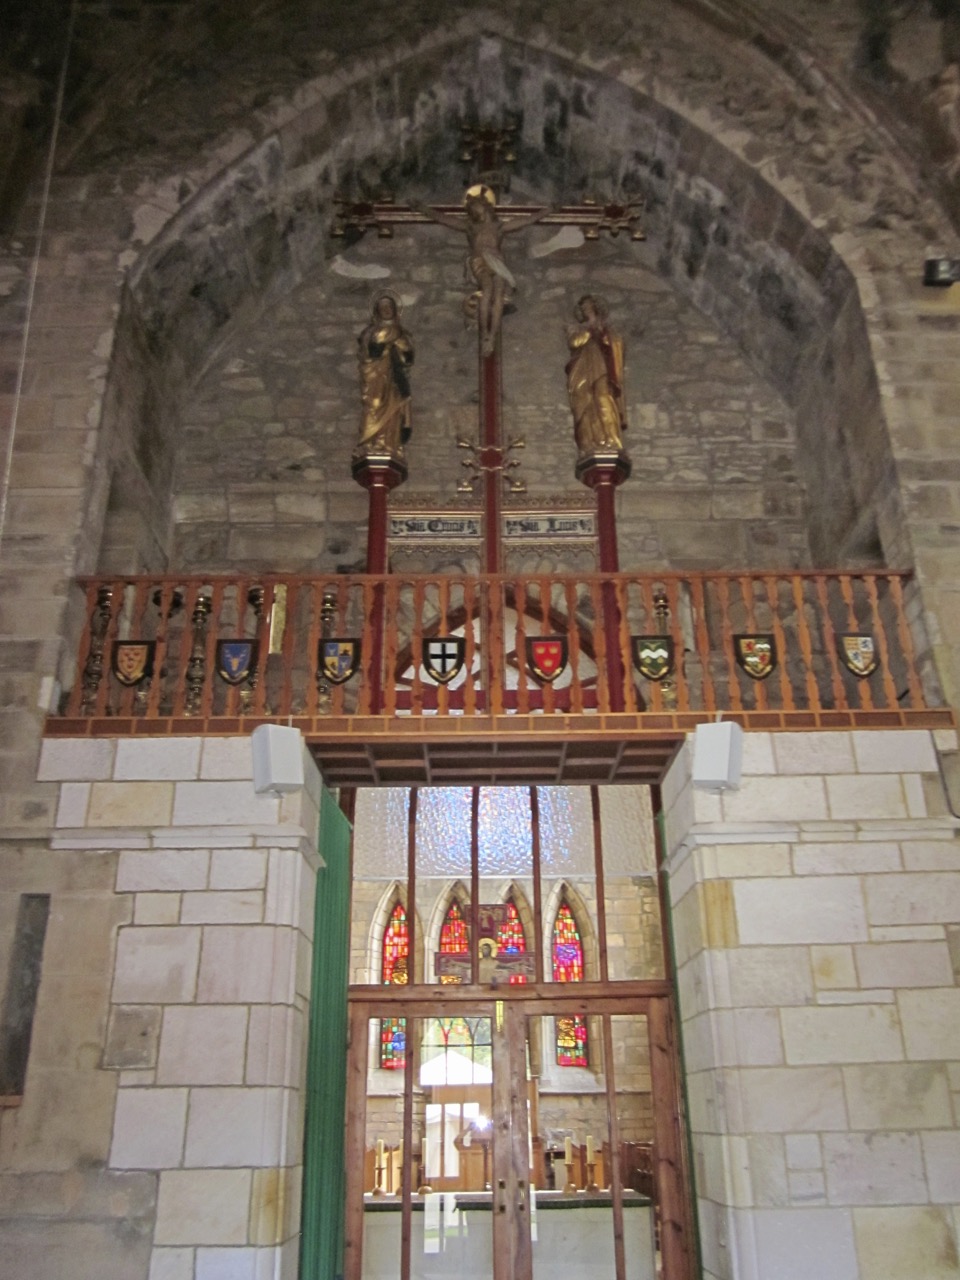 Crucifixion group over the entrance